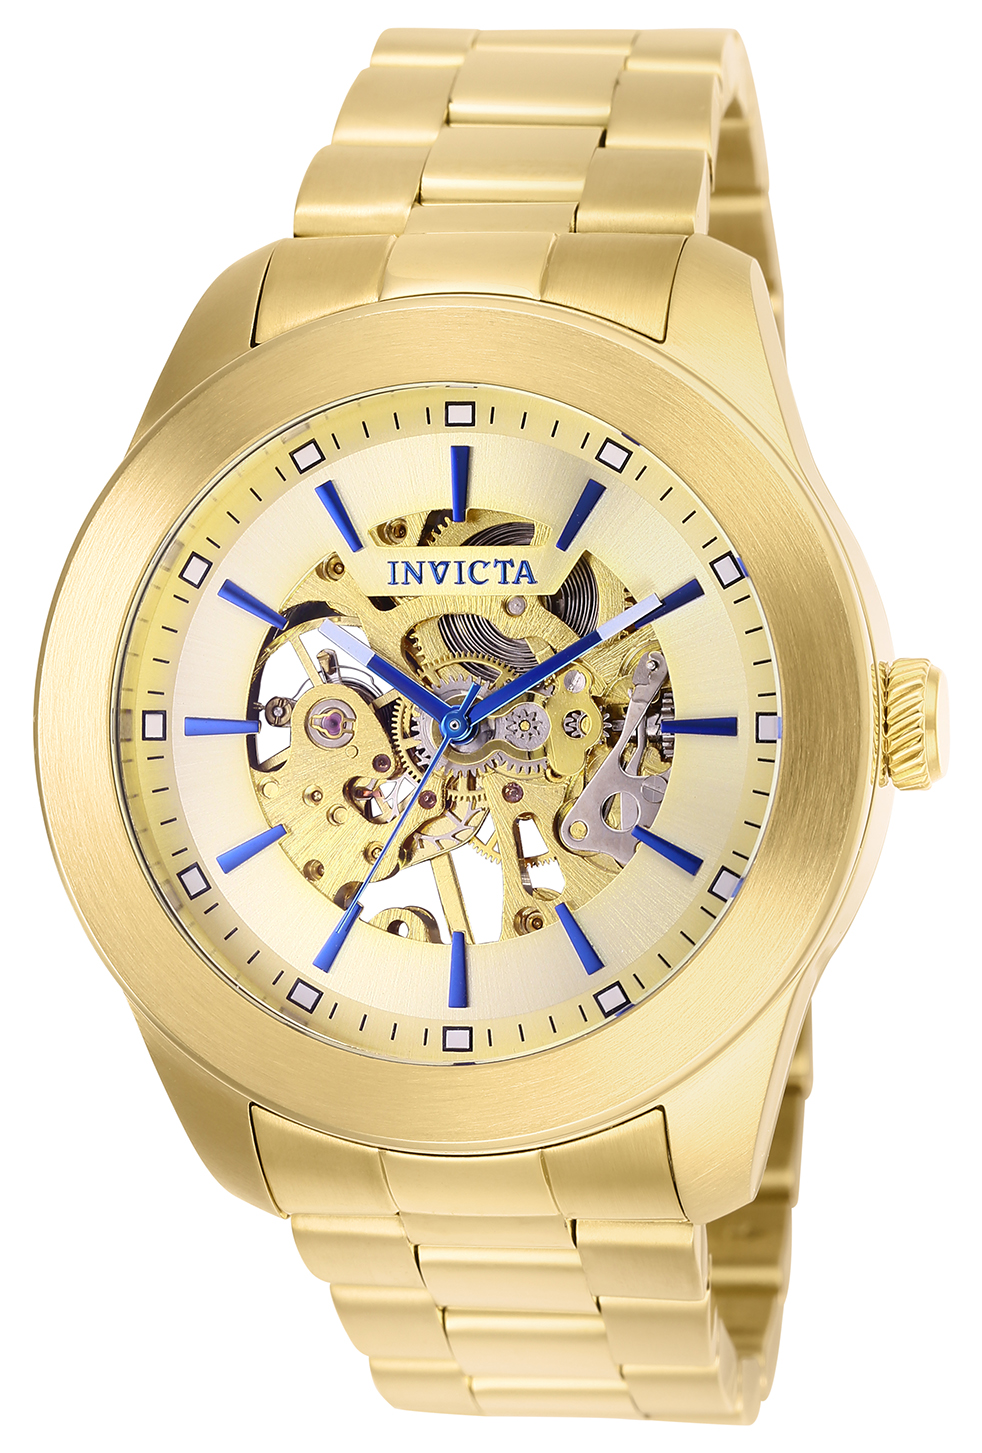 Pre-Owned Invicta Vintage Mechanical Men's Watch - 45mm Stainless Steel Case, Stainless Steel Band, Gold (AIC-25759)